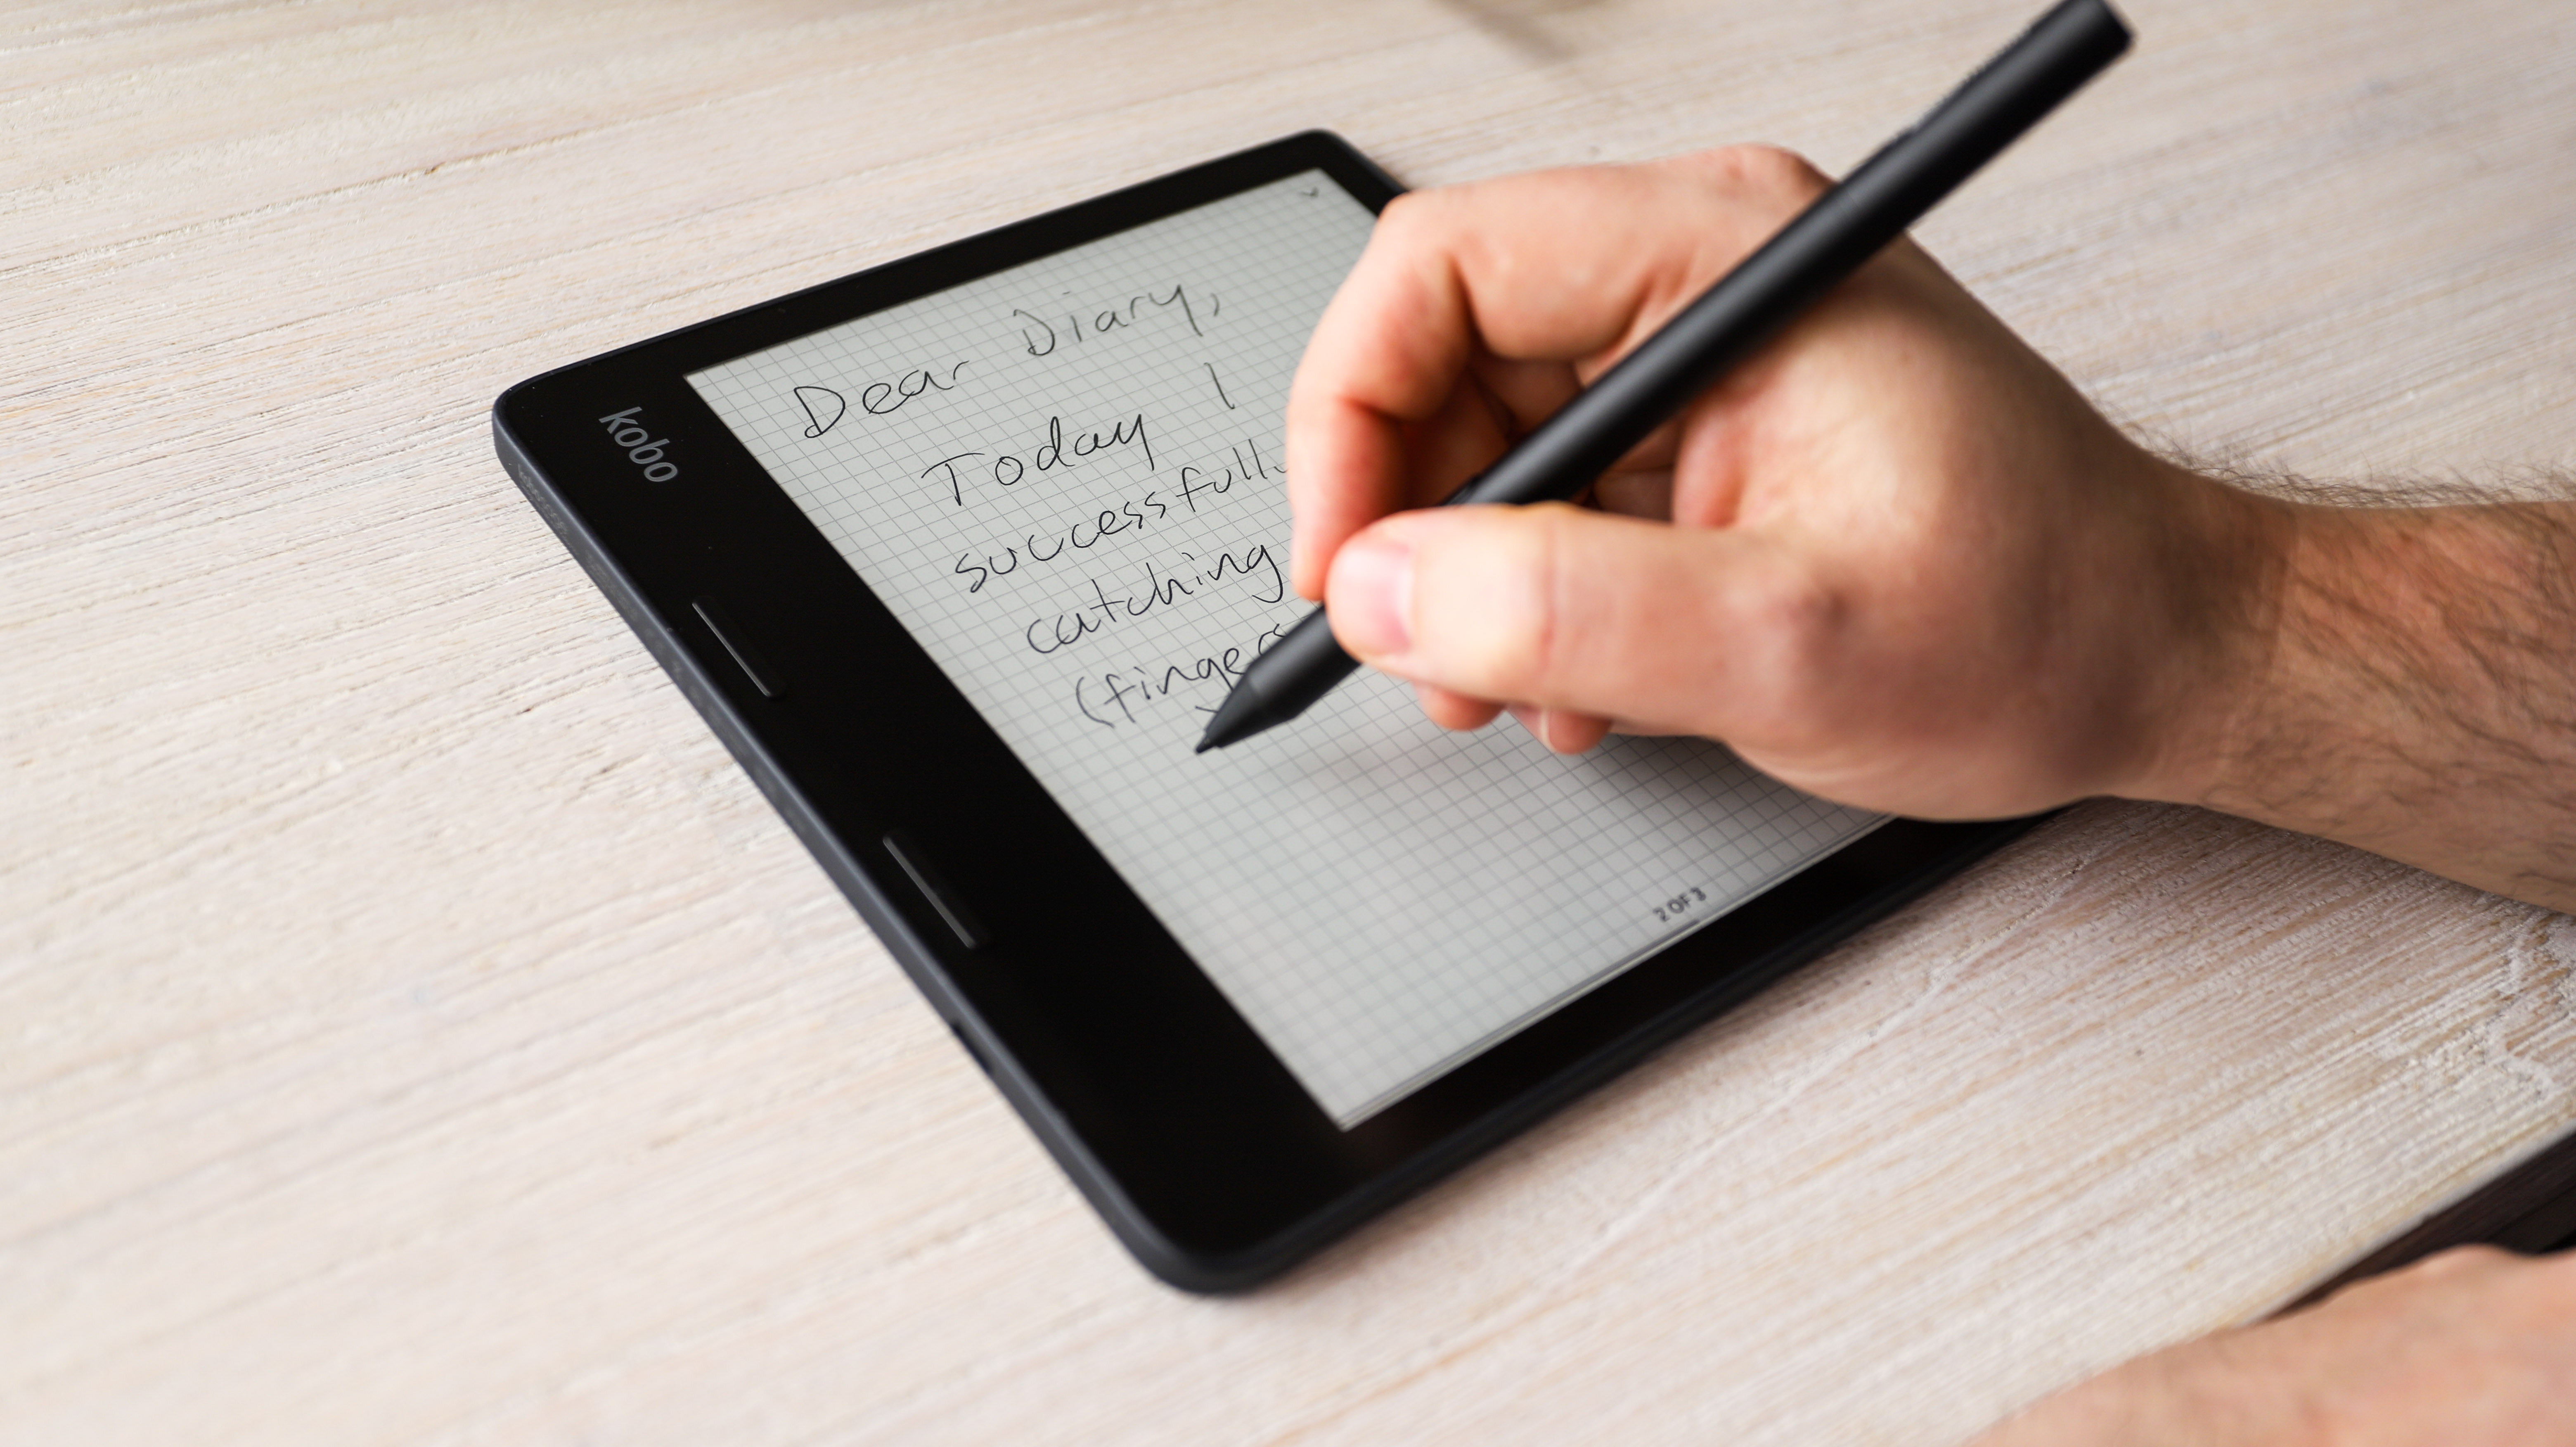 Writing with the stylus on the Kobo Sage